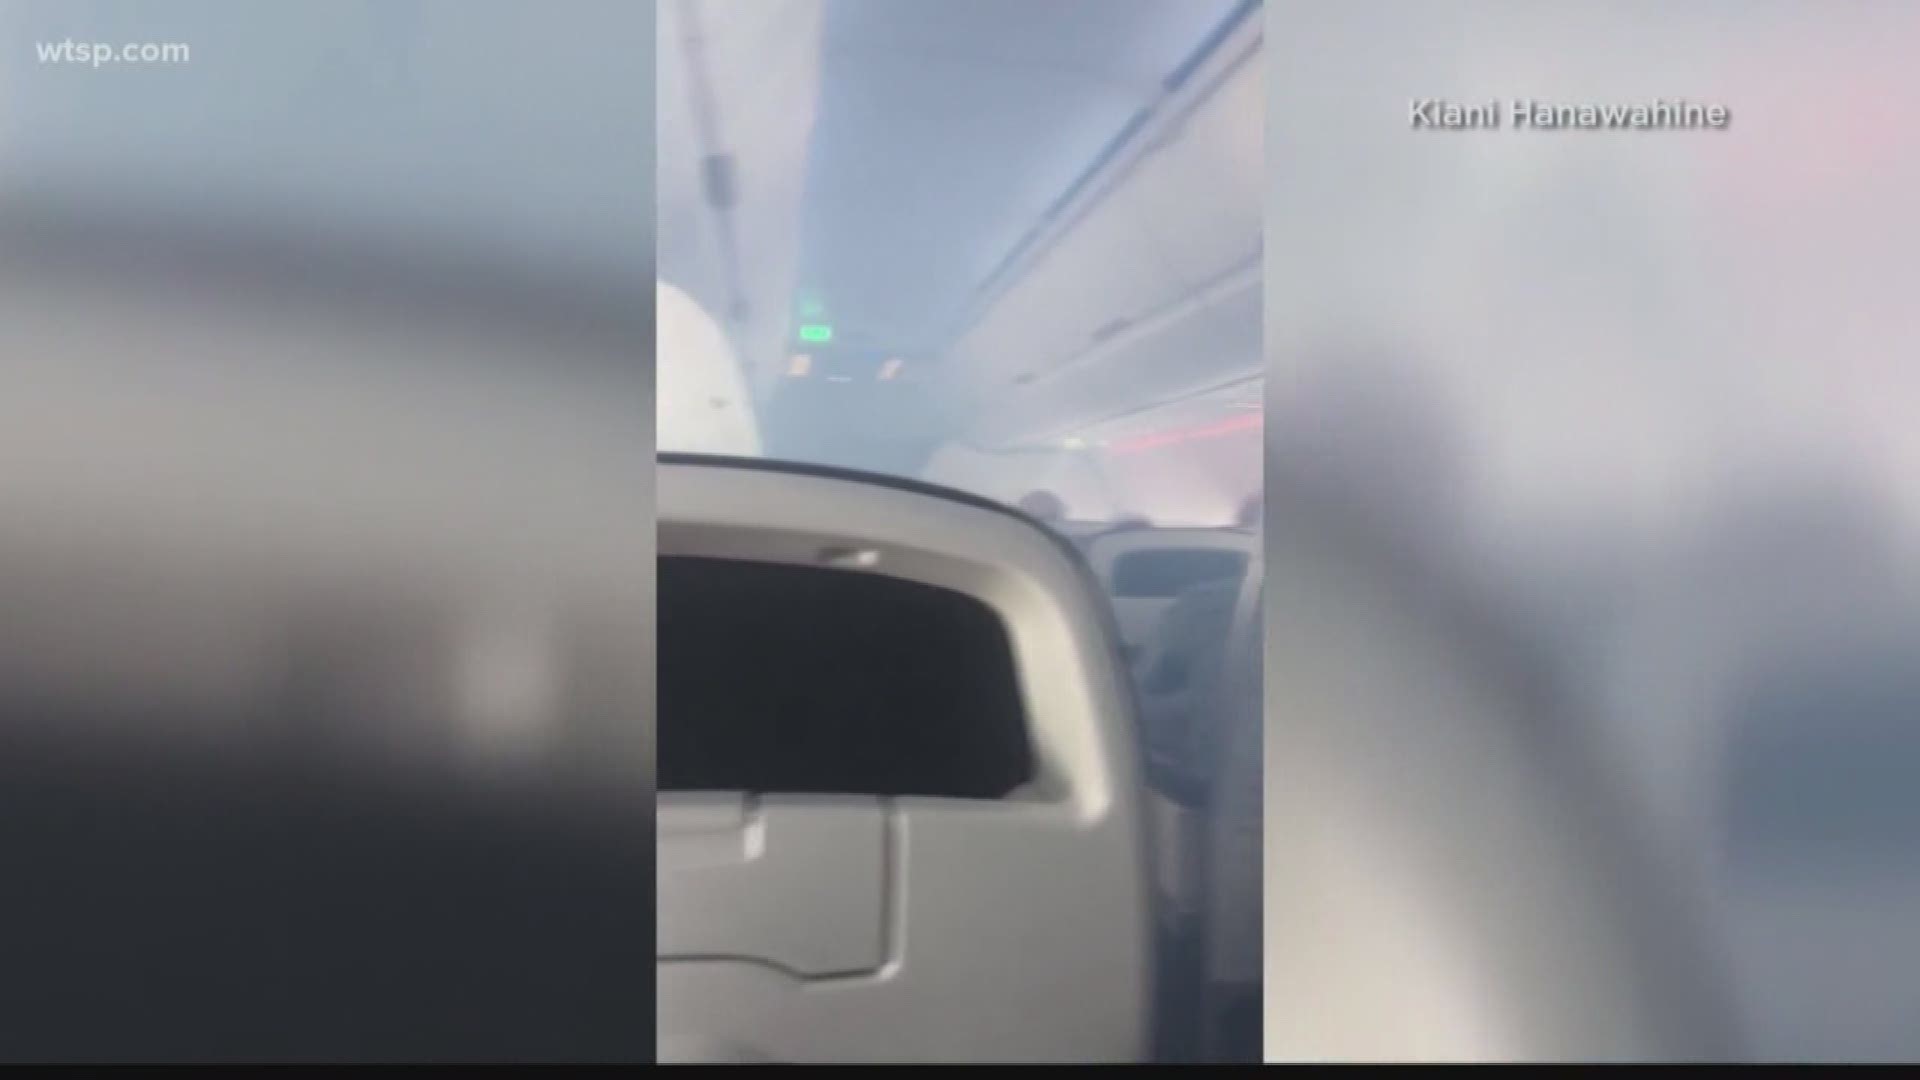 Authorities say passengers on a Hawaiian Airlines flight from Oakland, California, to Honolulu used emergency slides to evacuate on a runway after a report of possible smoke or fire in the aircraft's cargo area.